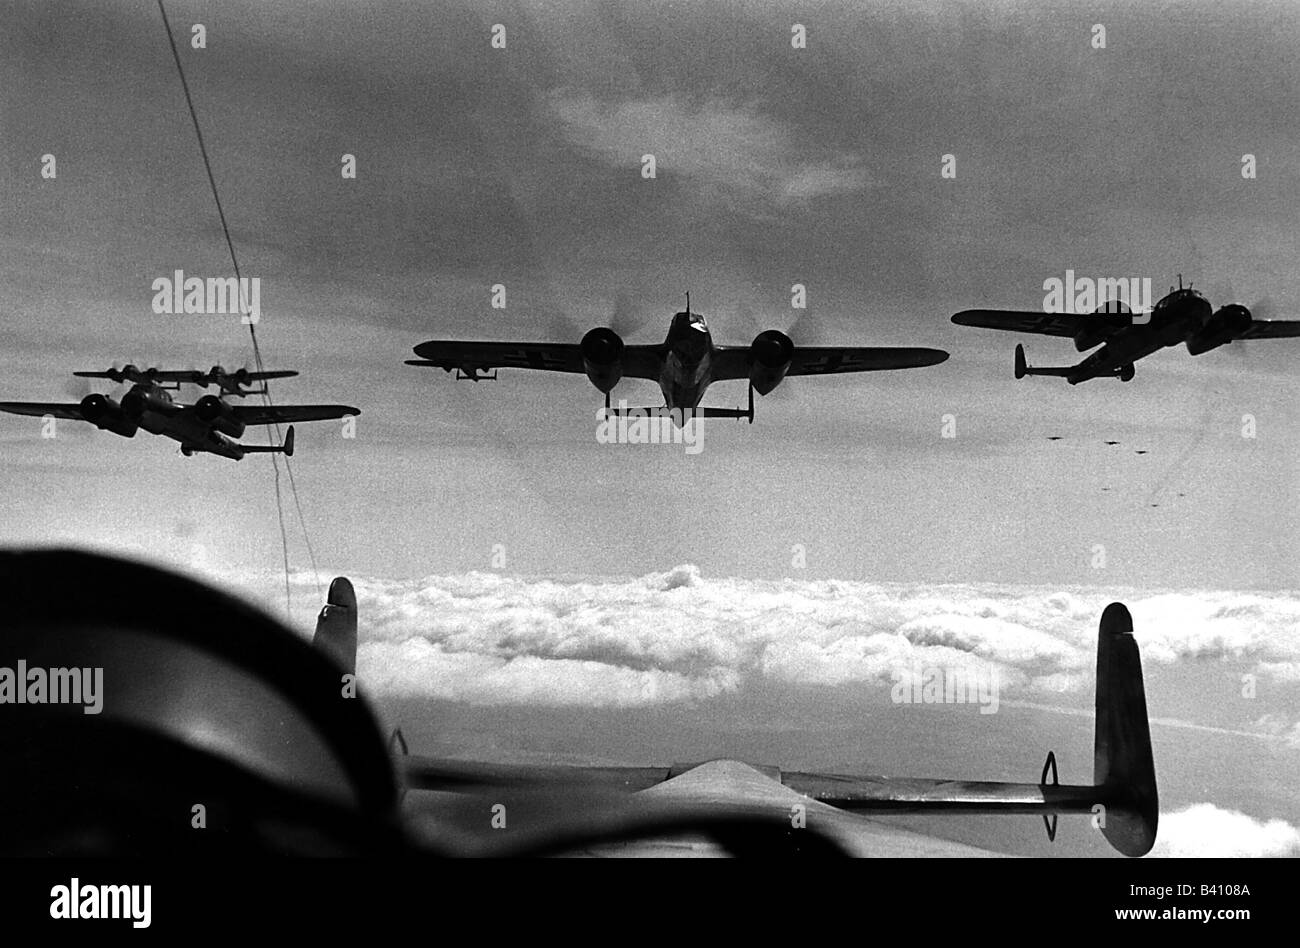 events, Second World War / WWII, aerial warfare, England, German bombers Dornier Do 17 over the clouds, summer 1940, Do-17, Do17, bomber, wing, flying, 20th century, historic, historical, Battle of Britain, Luftwaffe, Wehrmacht, Germany, Great Britain, Third Reich, plane, planes, 1940s, Stock Photo